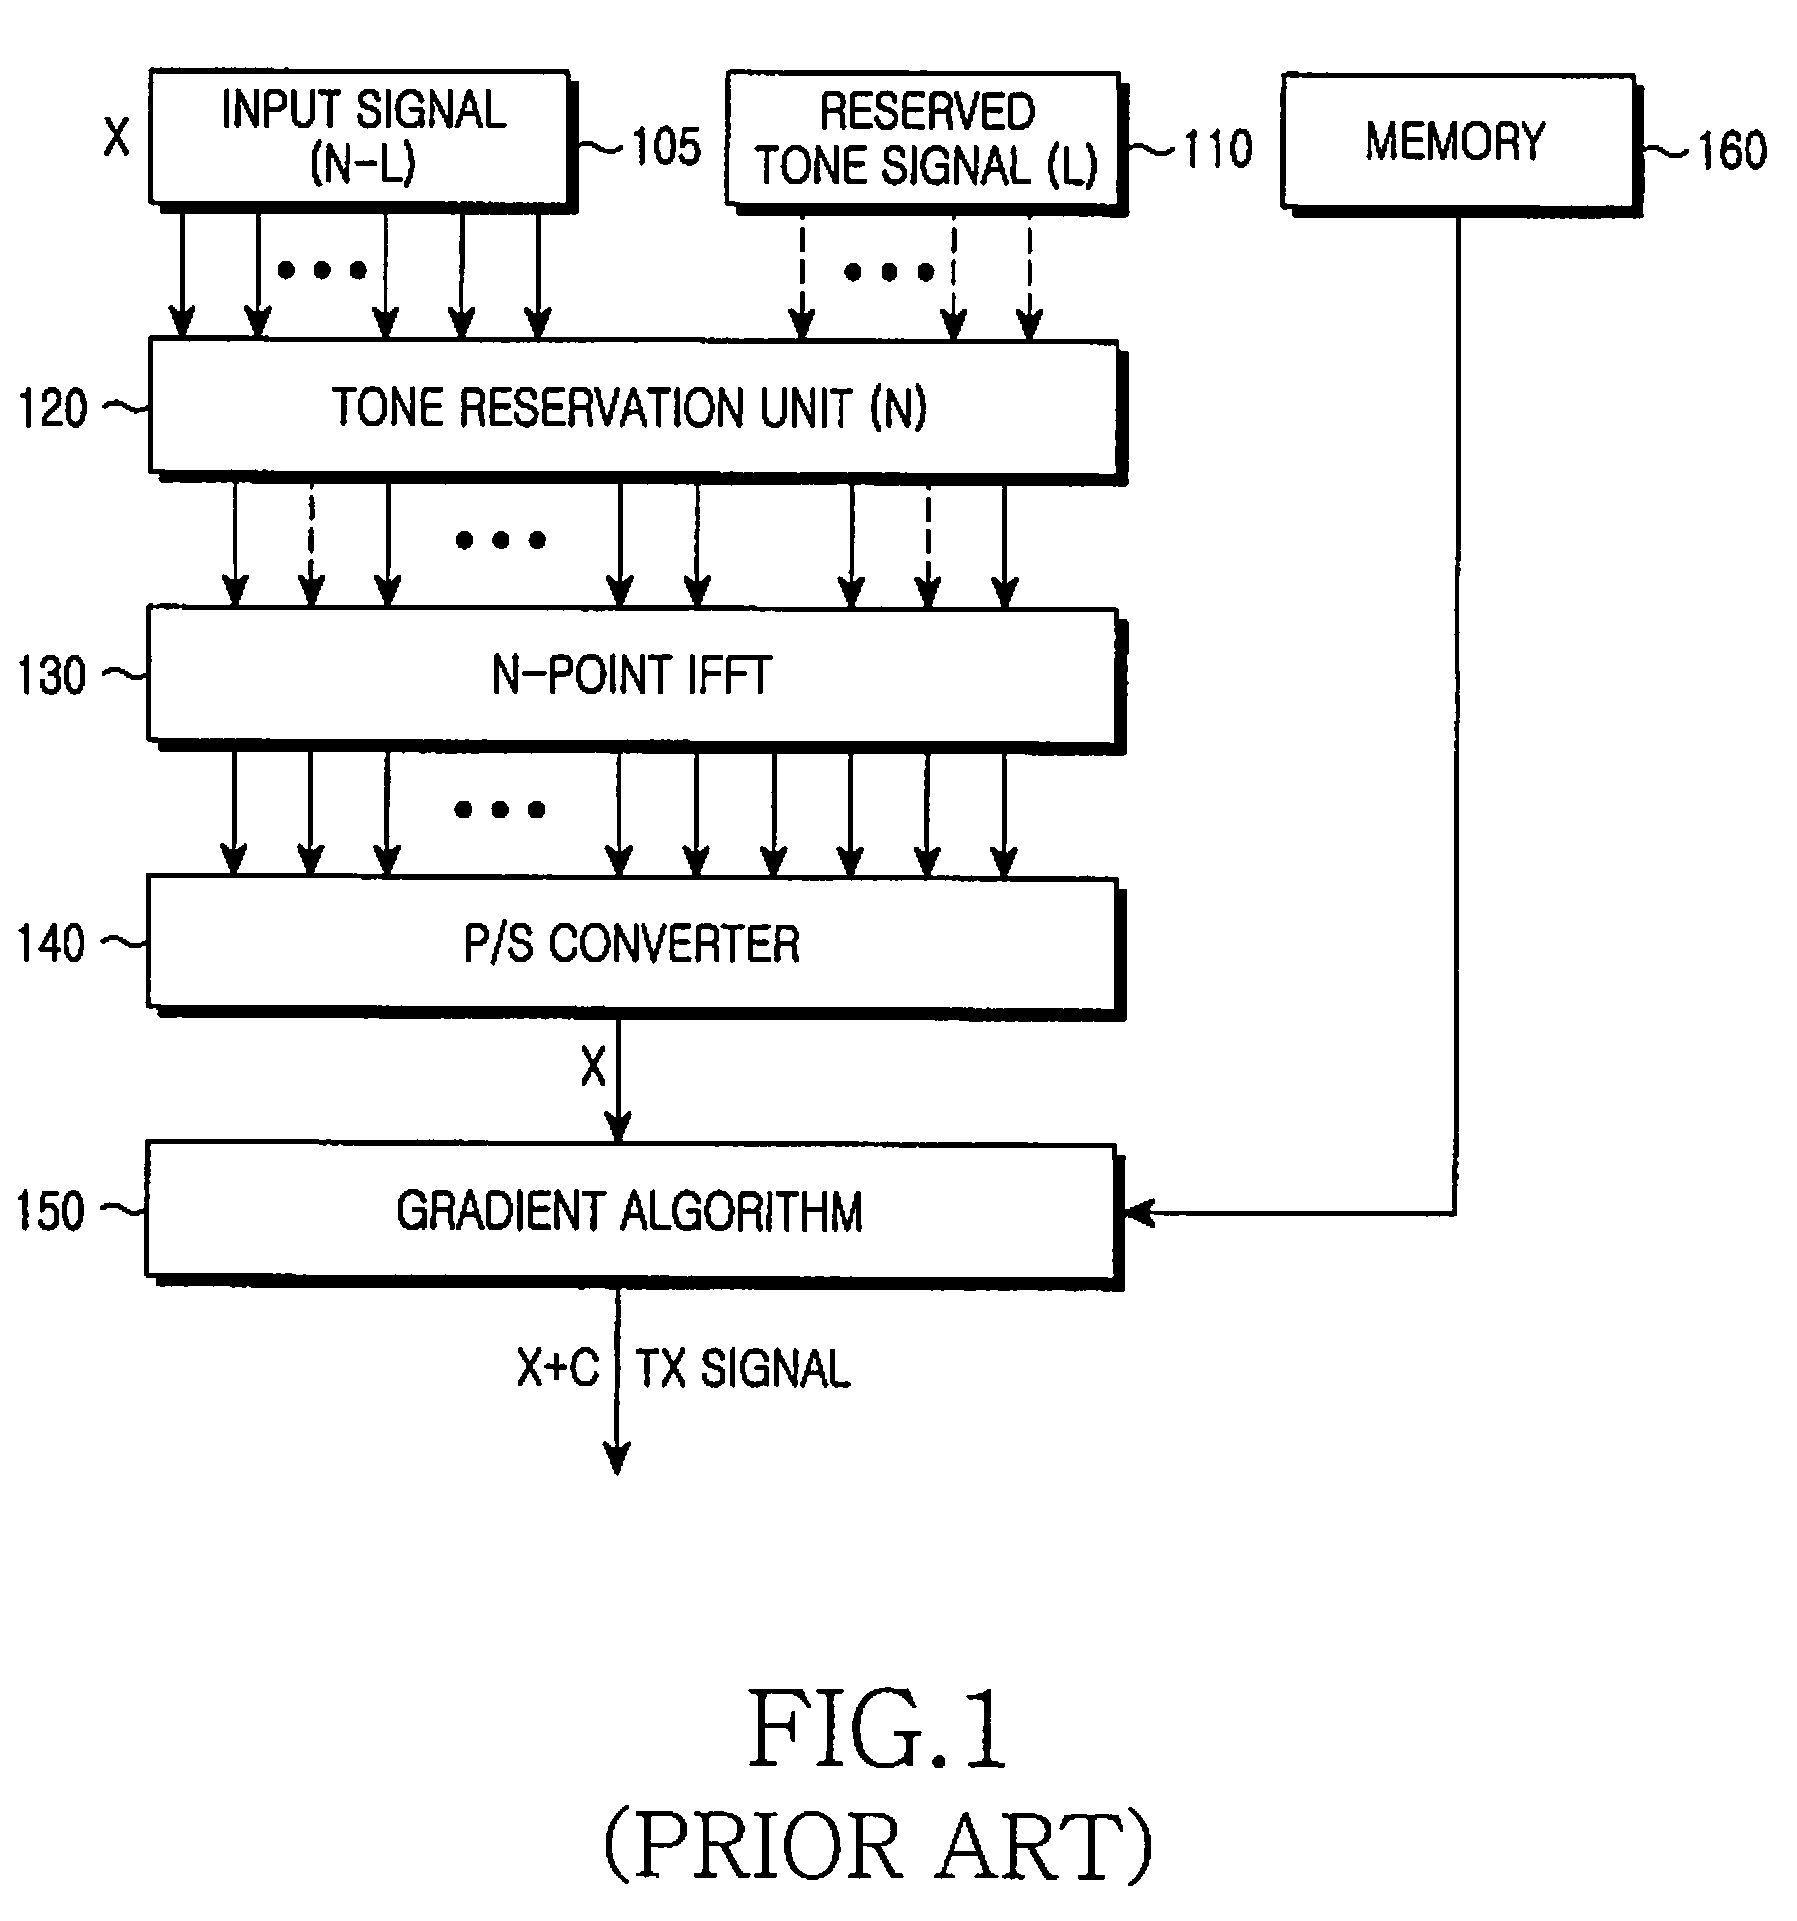 Apparatus and method for reducing peak to average power ratio in an orthogonal frequency division multiplexing system